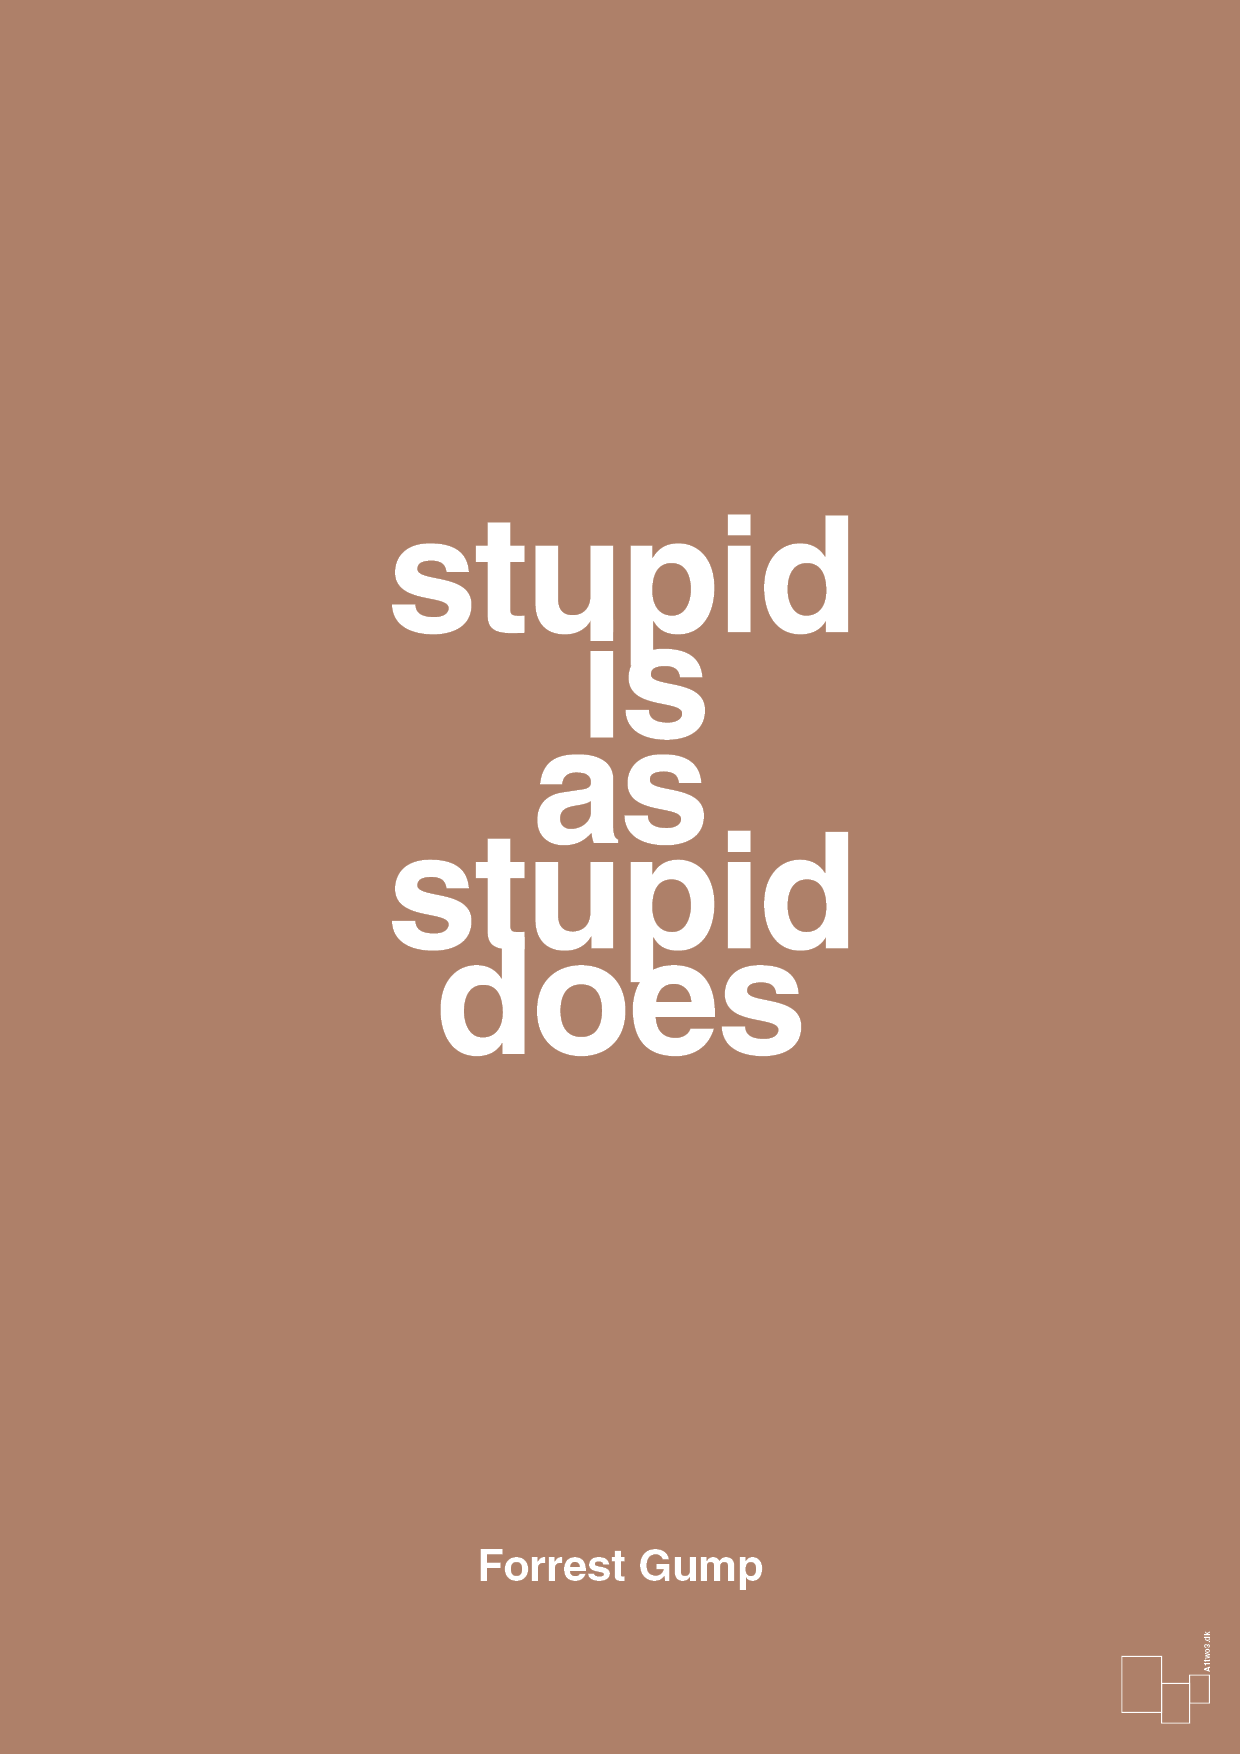 stupid is as stupid does - Plakat med Citater i Cider Spice